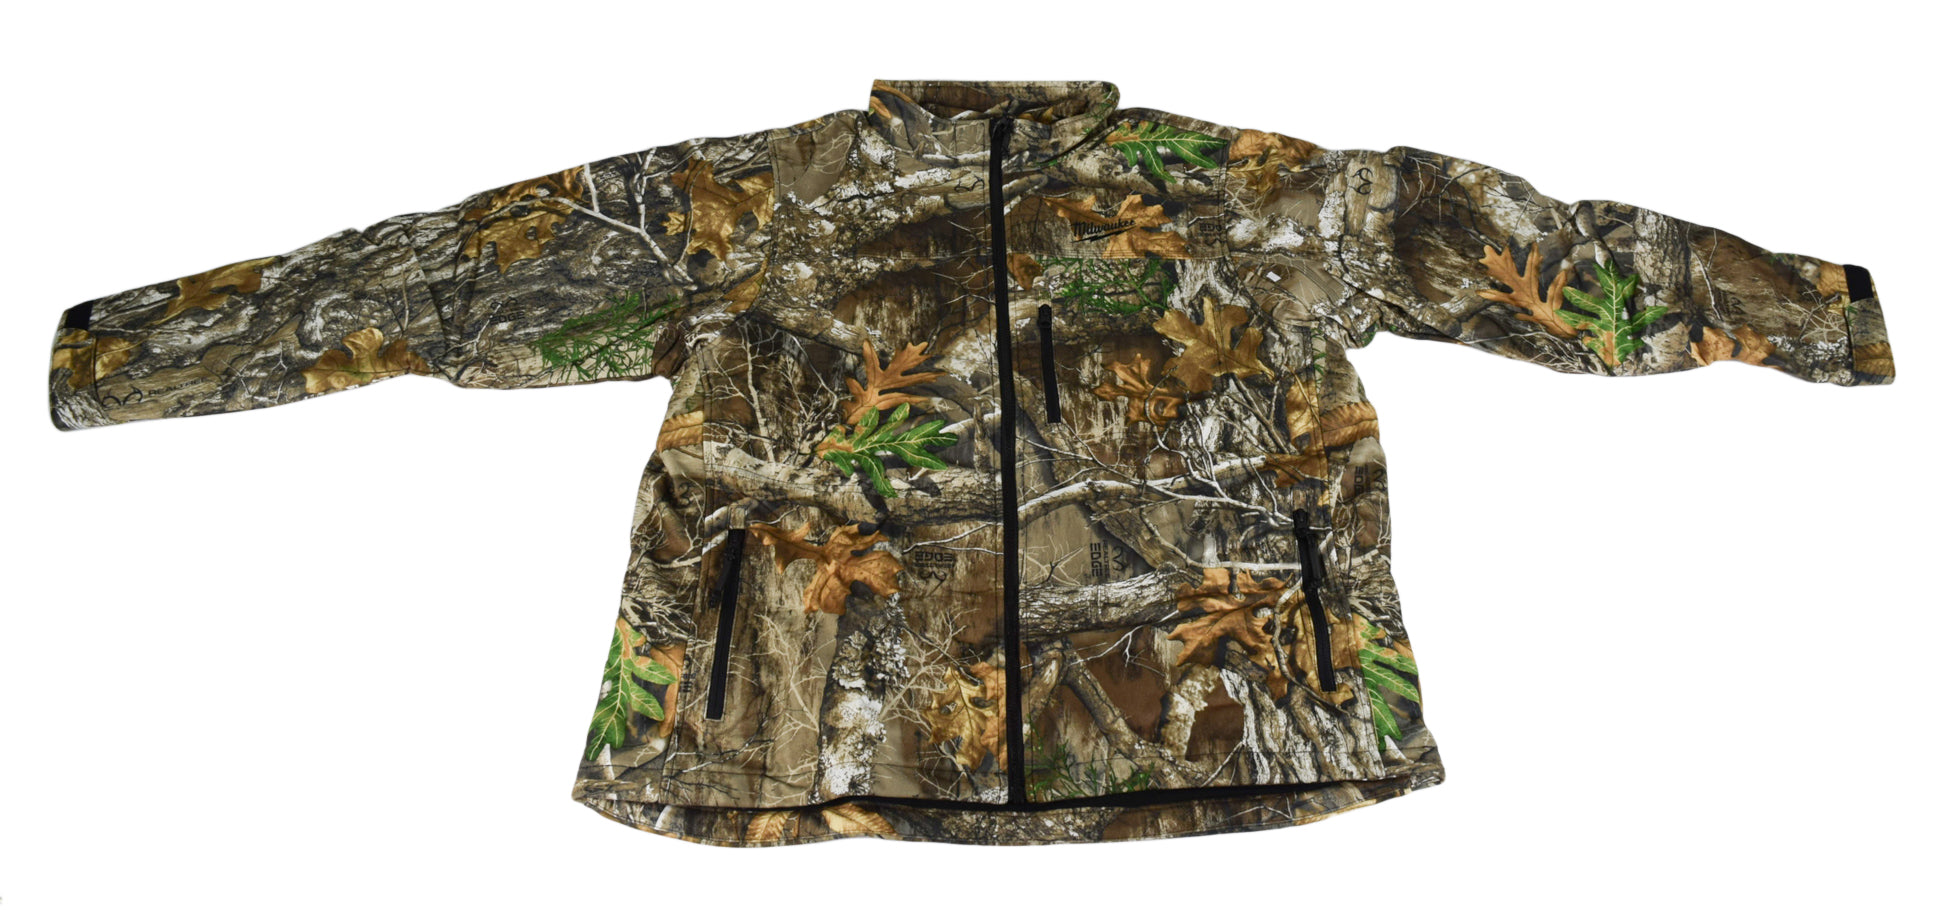 Milwaukee 222C-21L M12 Heated QuietShell Jacket Kit with Battery (Large/Realtree)